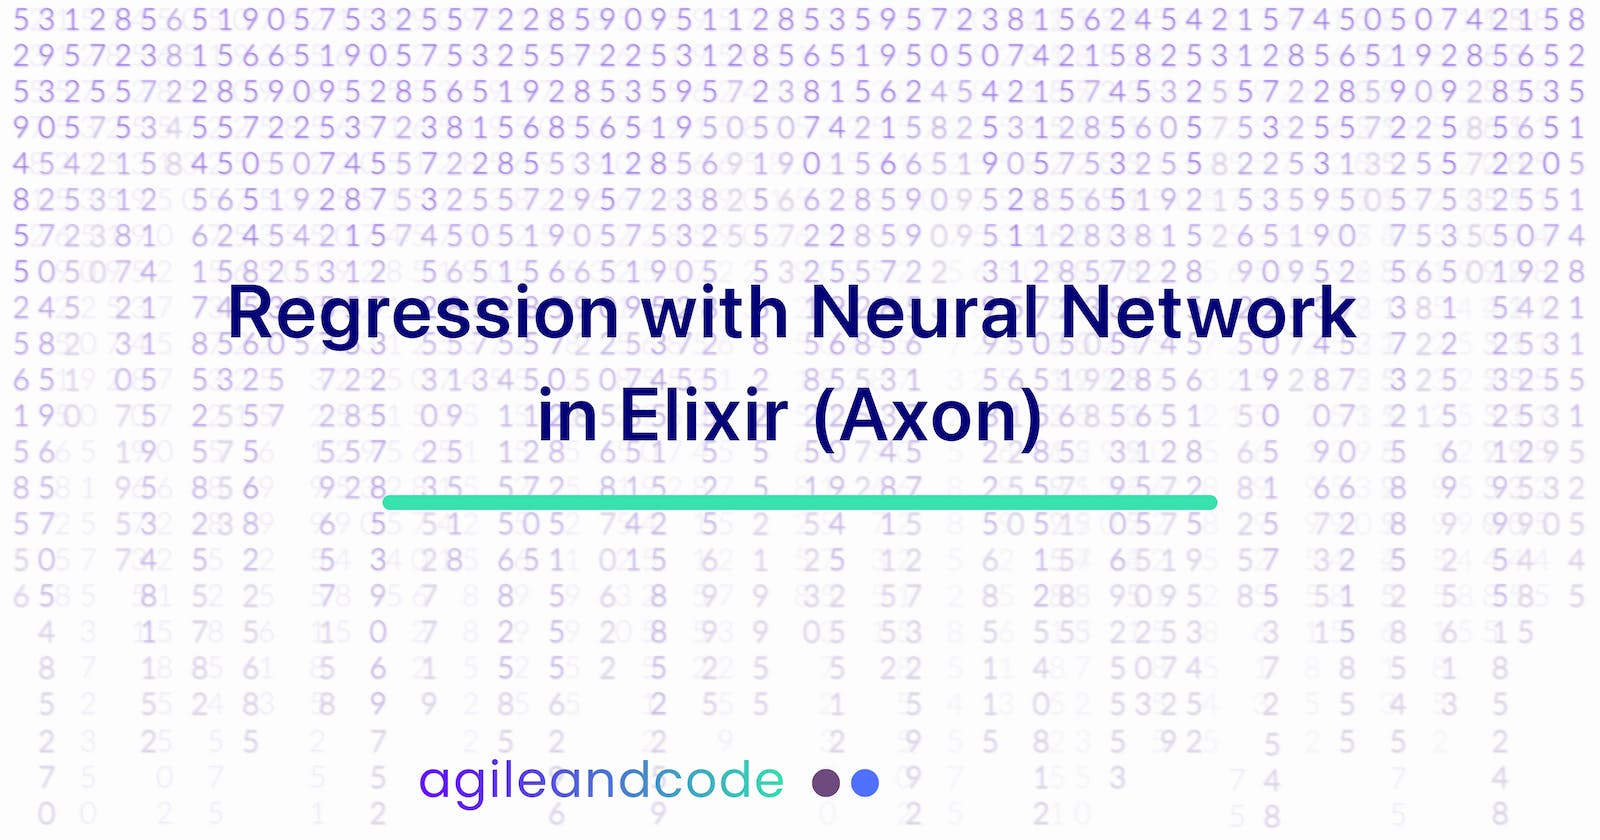 Regression with Neural Network in Elixir (Axon)